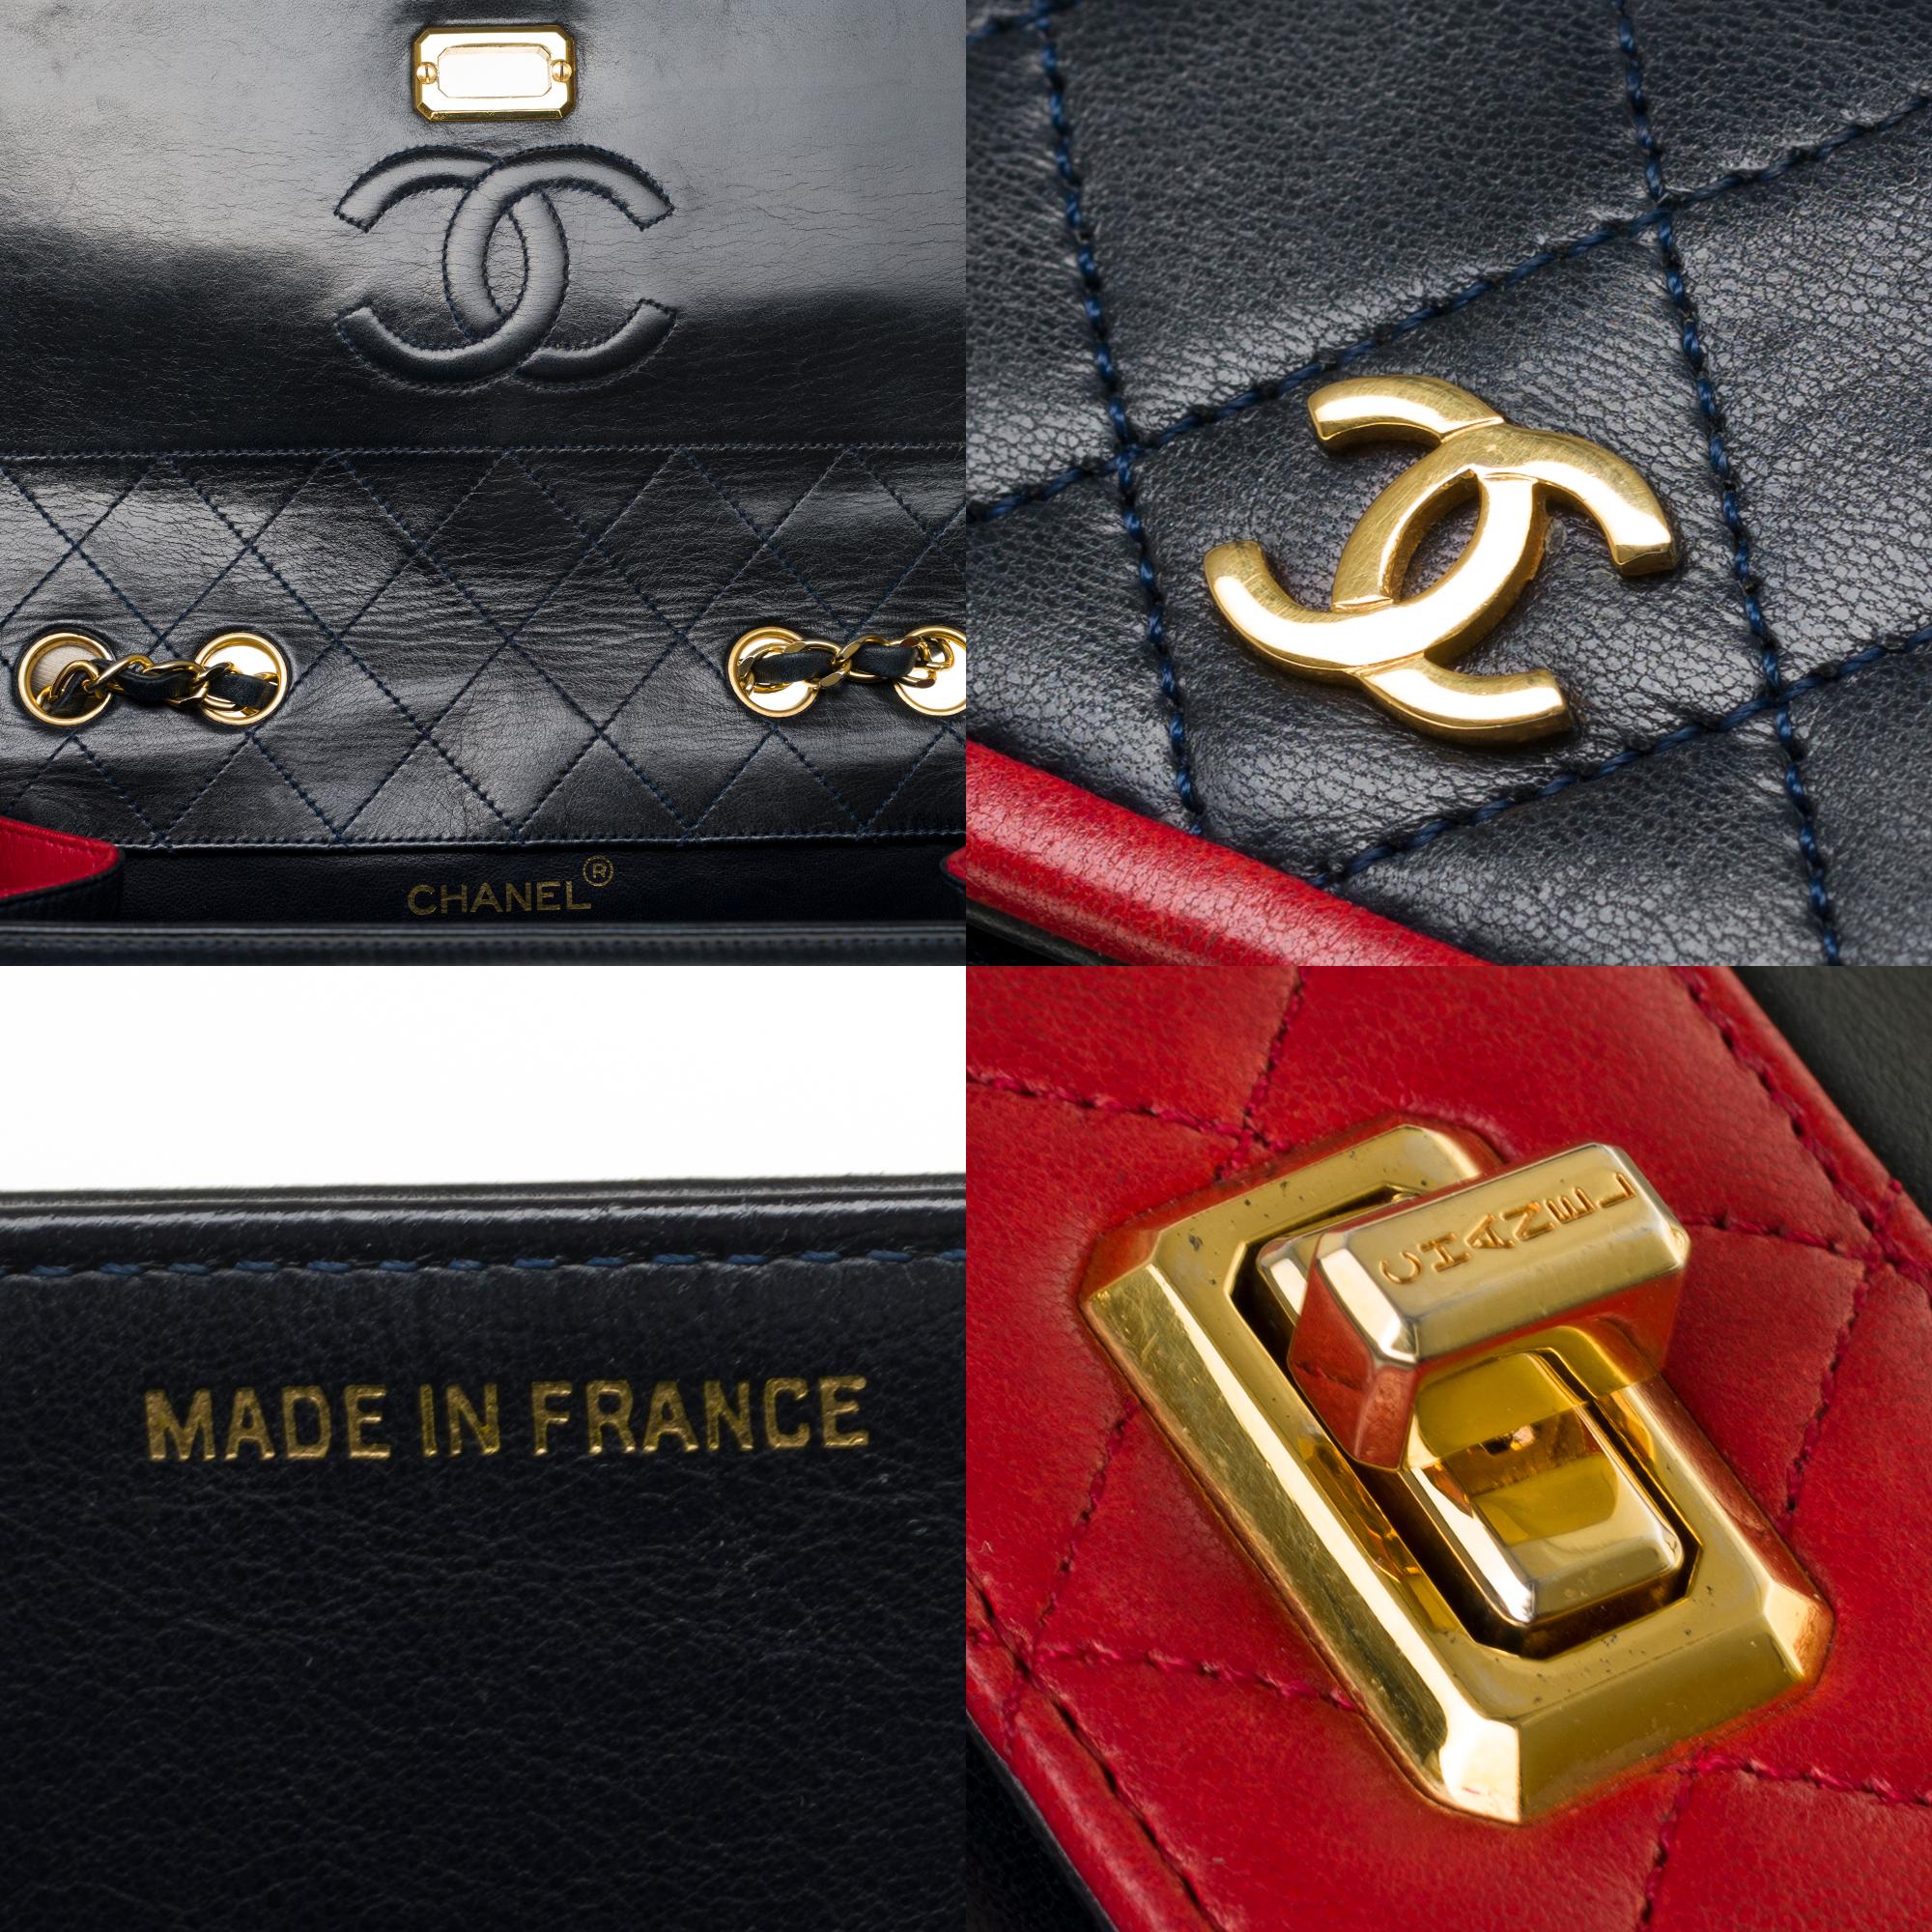 Black Rare Chanel Trapeze bicolor navy blue/red handbag in leather with its wallet